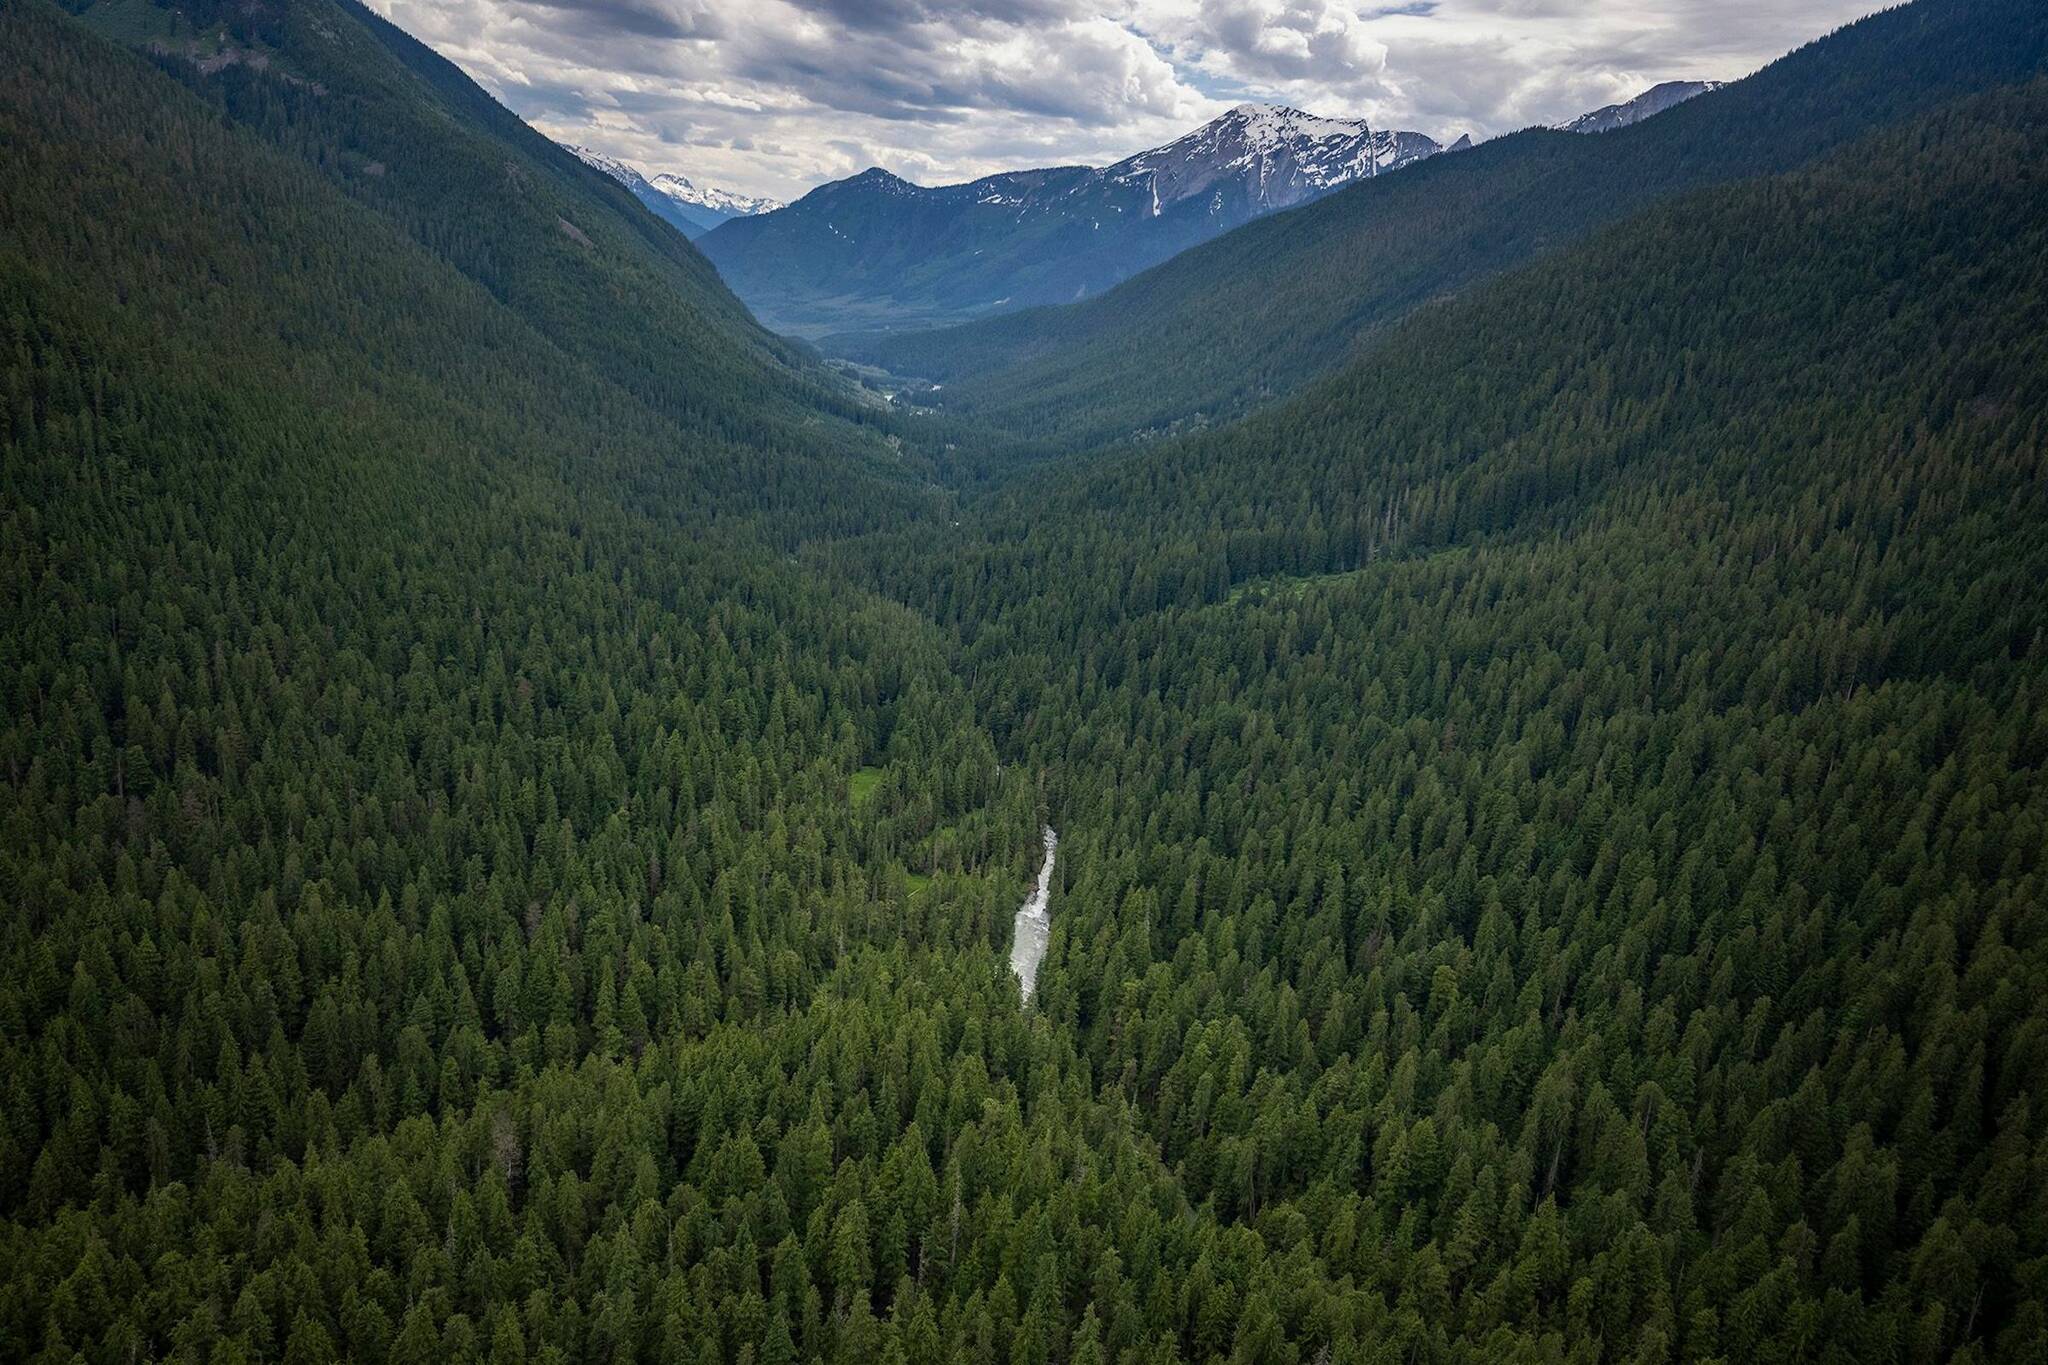 Environmentalists praise the creation of a new conservancy area in the Incomappleux Valley near Revelstoke. (Photo courtesy of Paul Zizka)